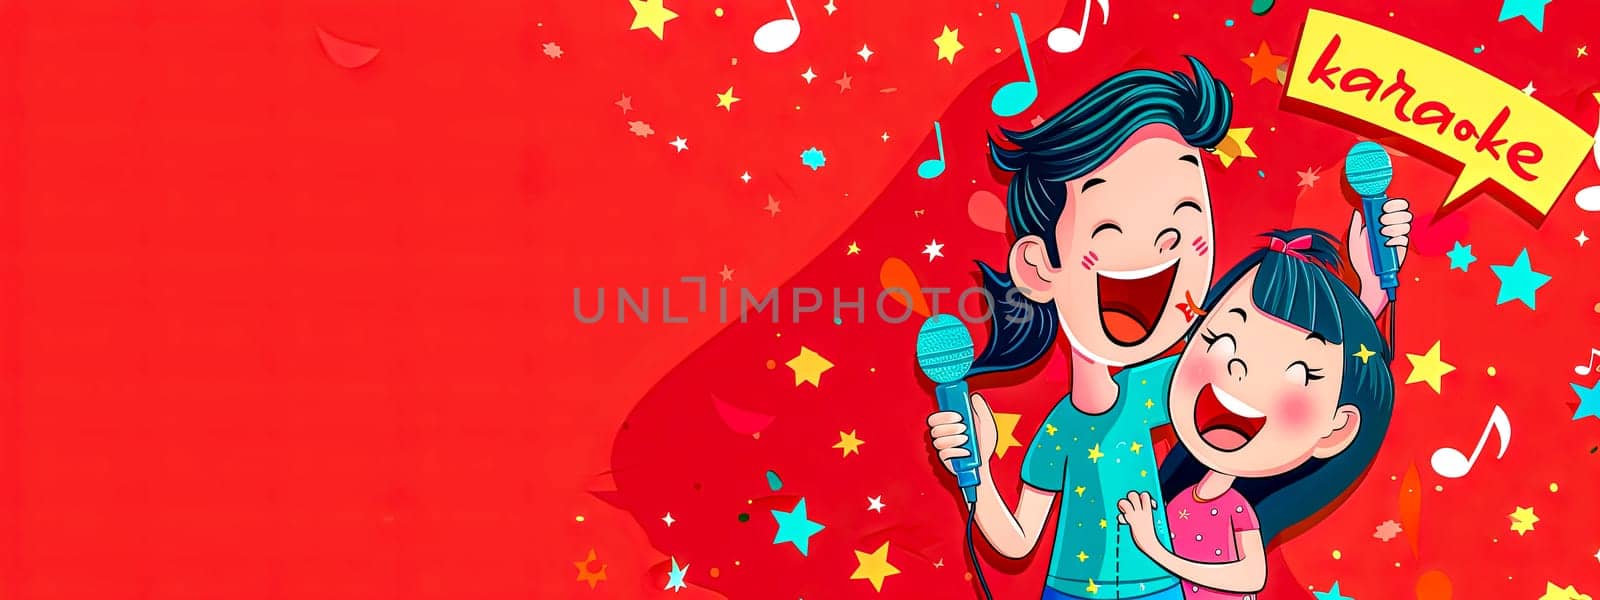 Animated children singing joyfully into microphones at a karaoke party on a vibrant red background by Edophoto